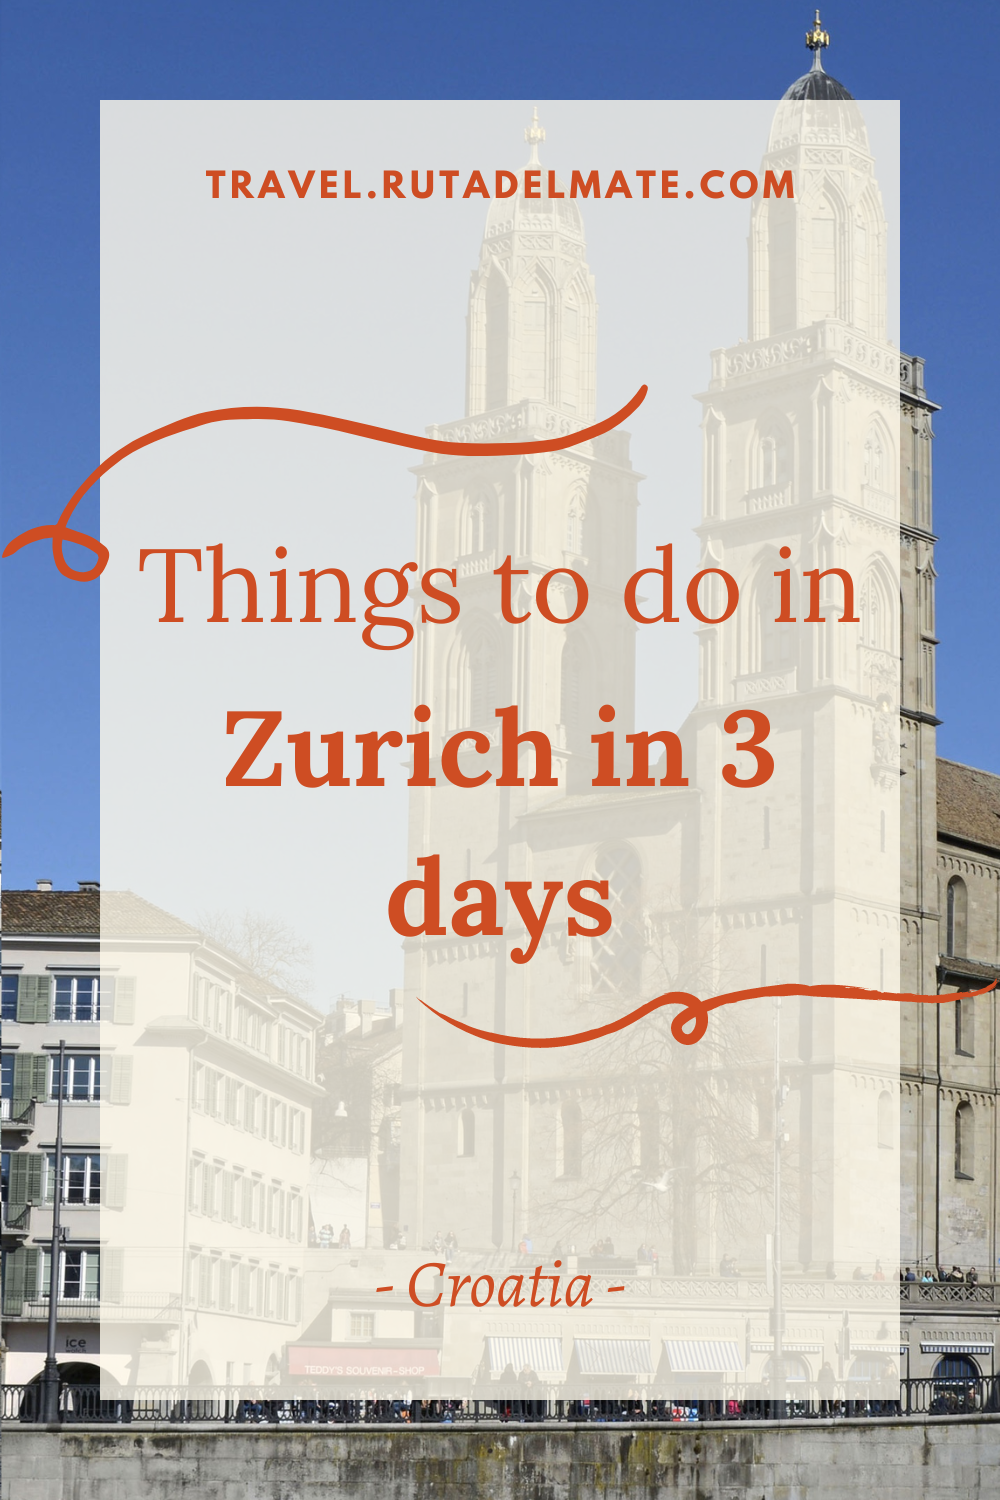 Things to do in Zurich in 3 days